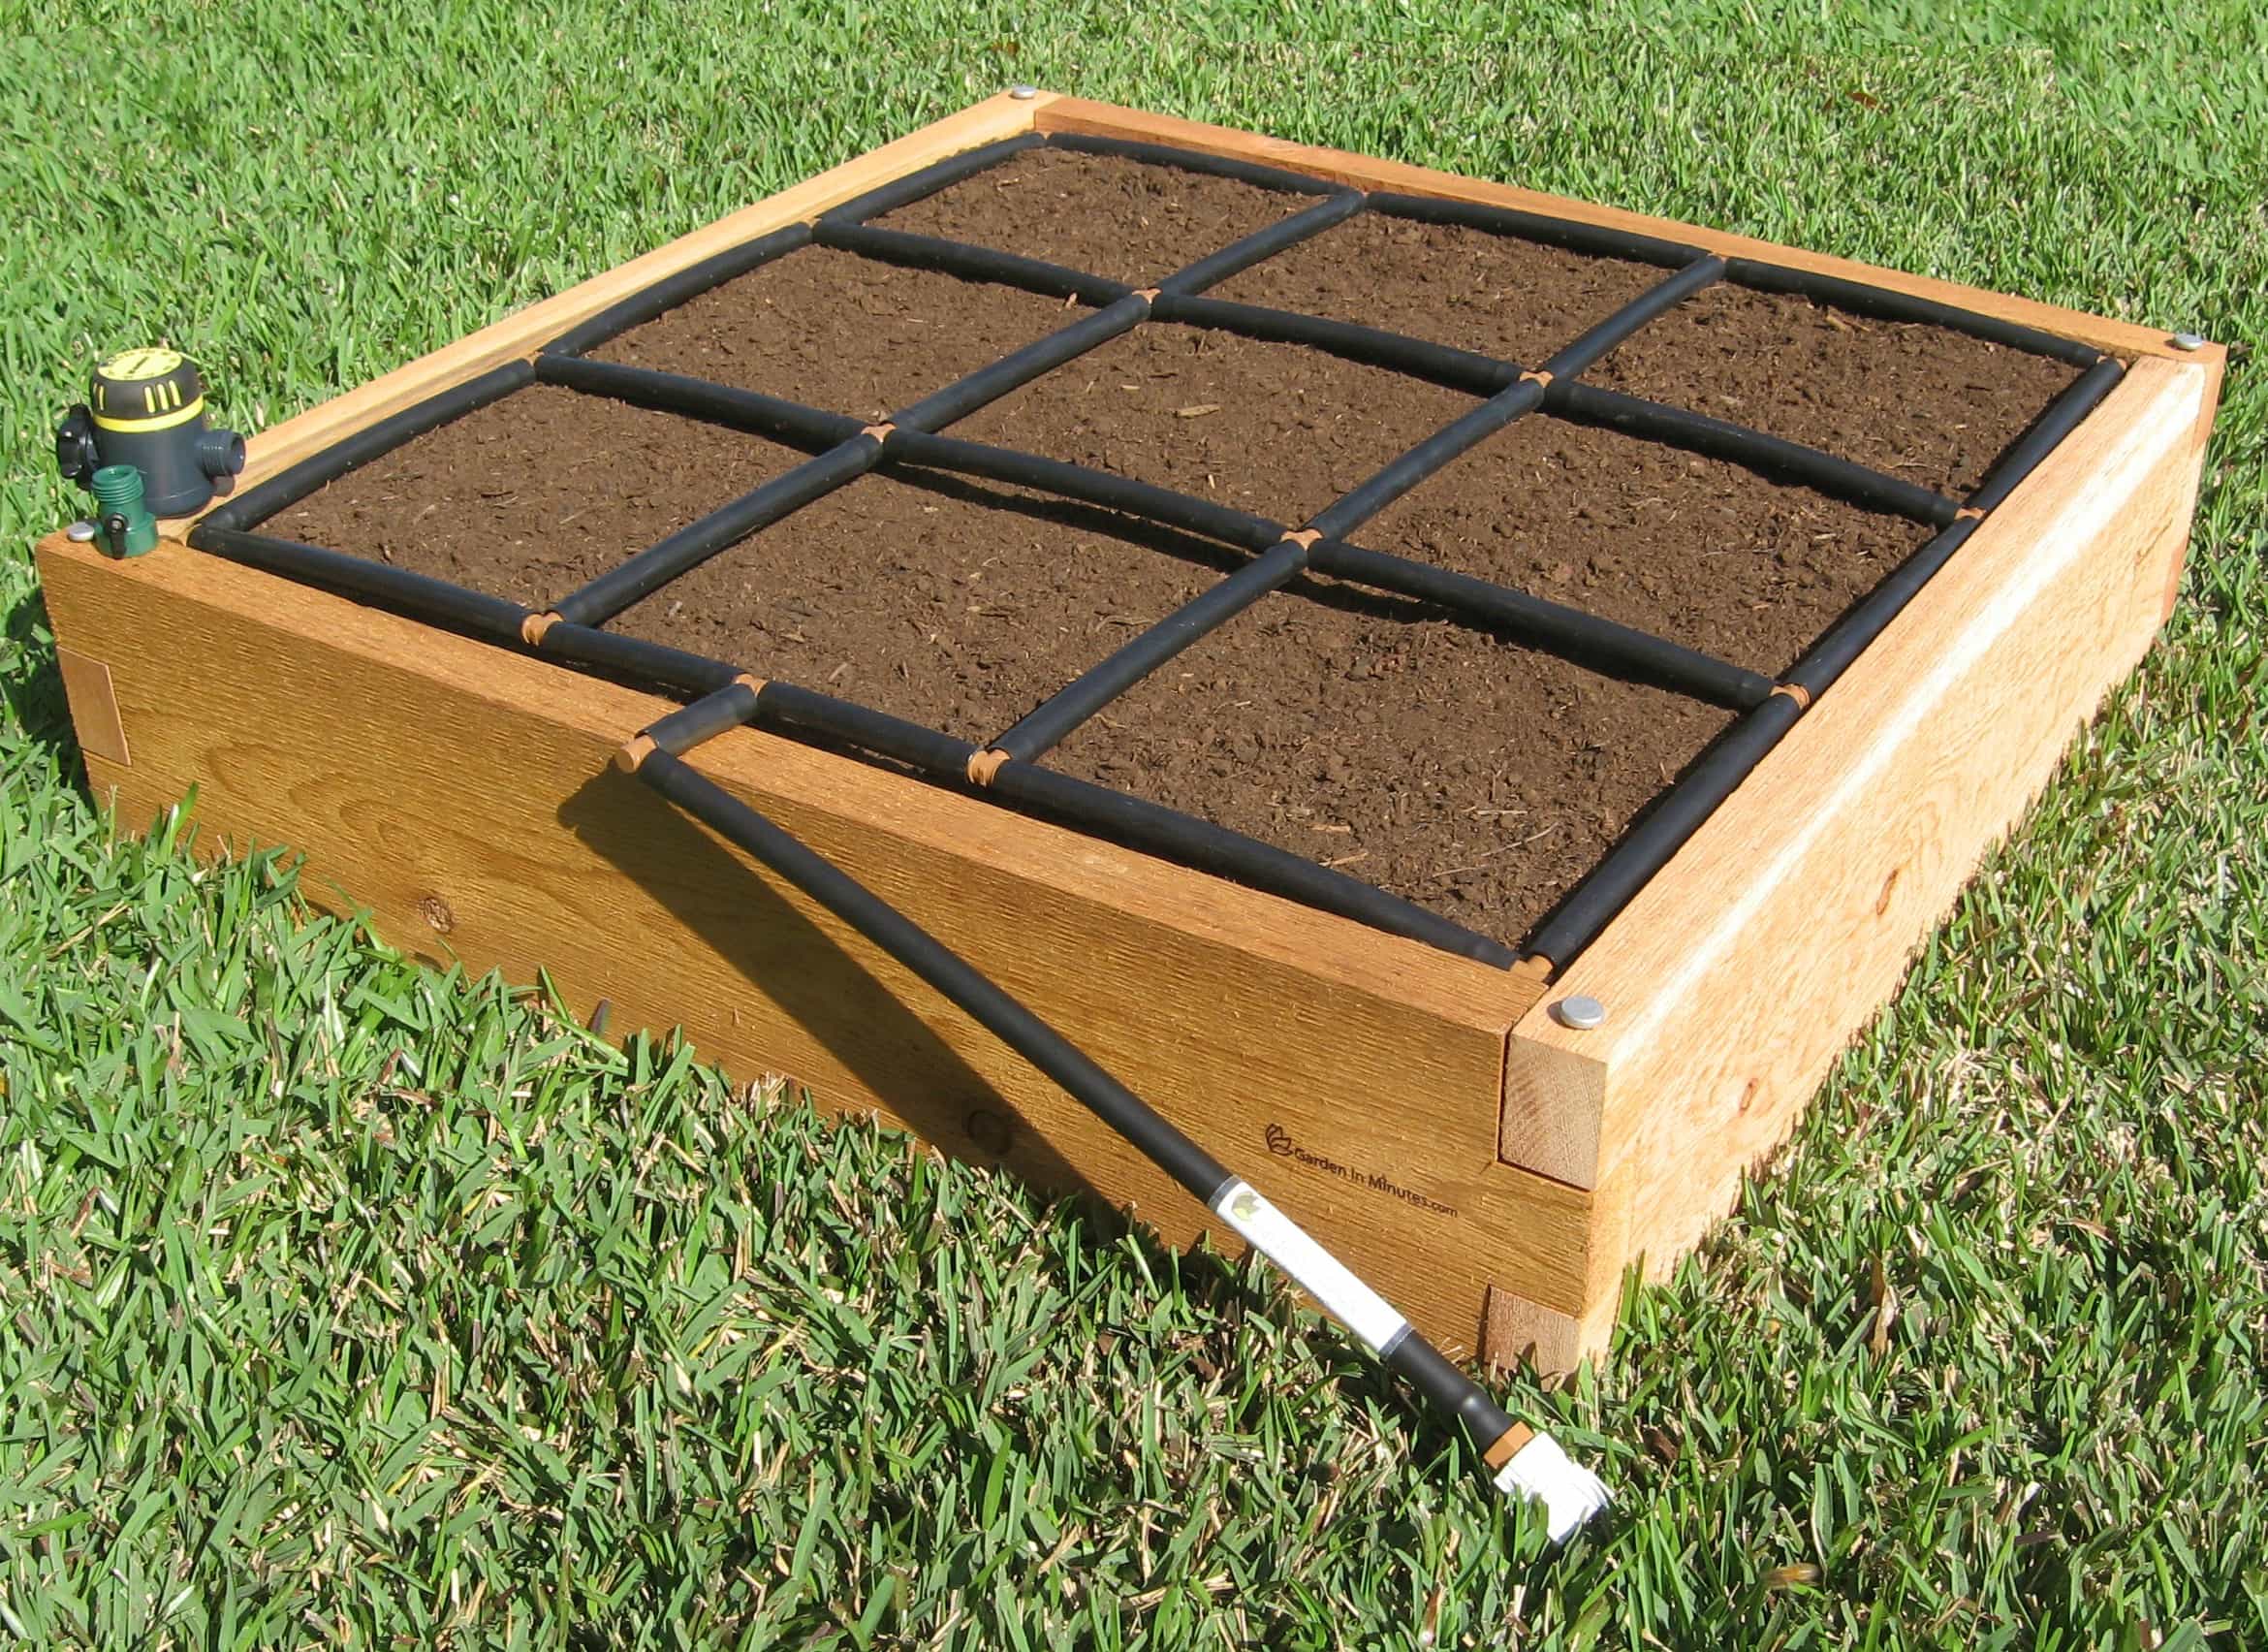 The Garden Grid Watering System - 3x3